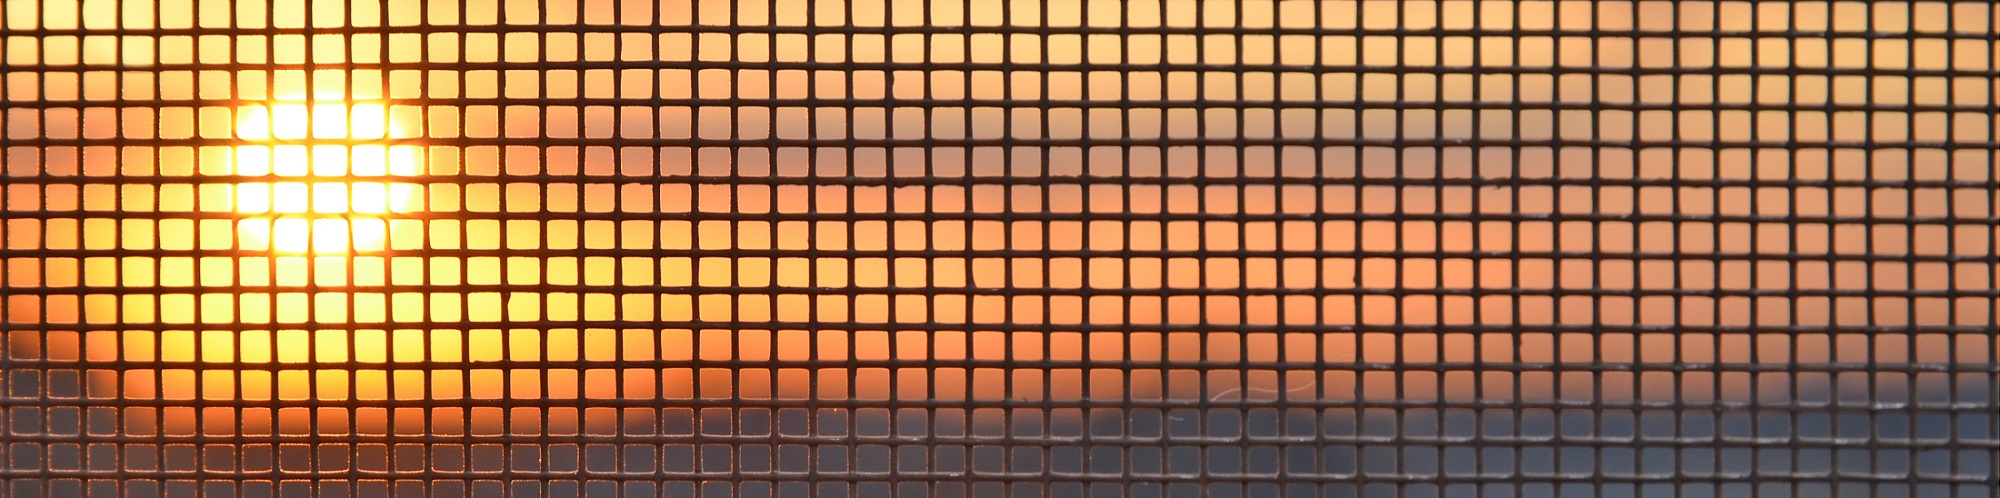 Sunset through the mosquito screen